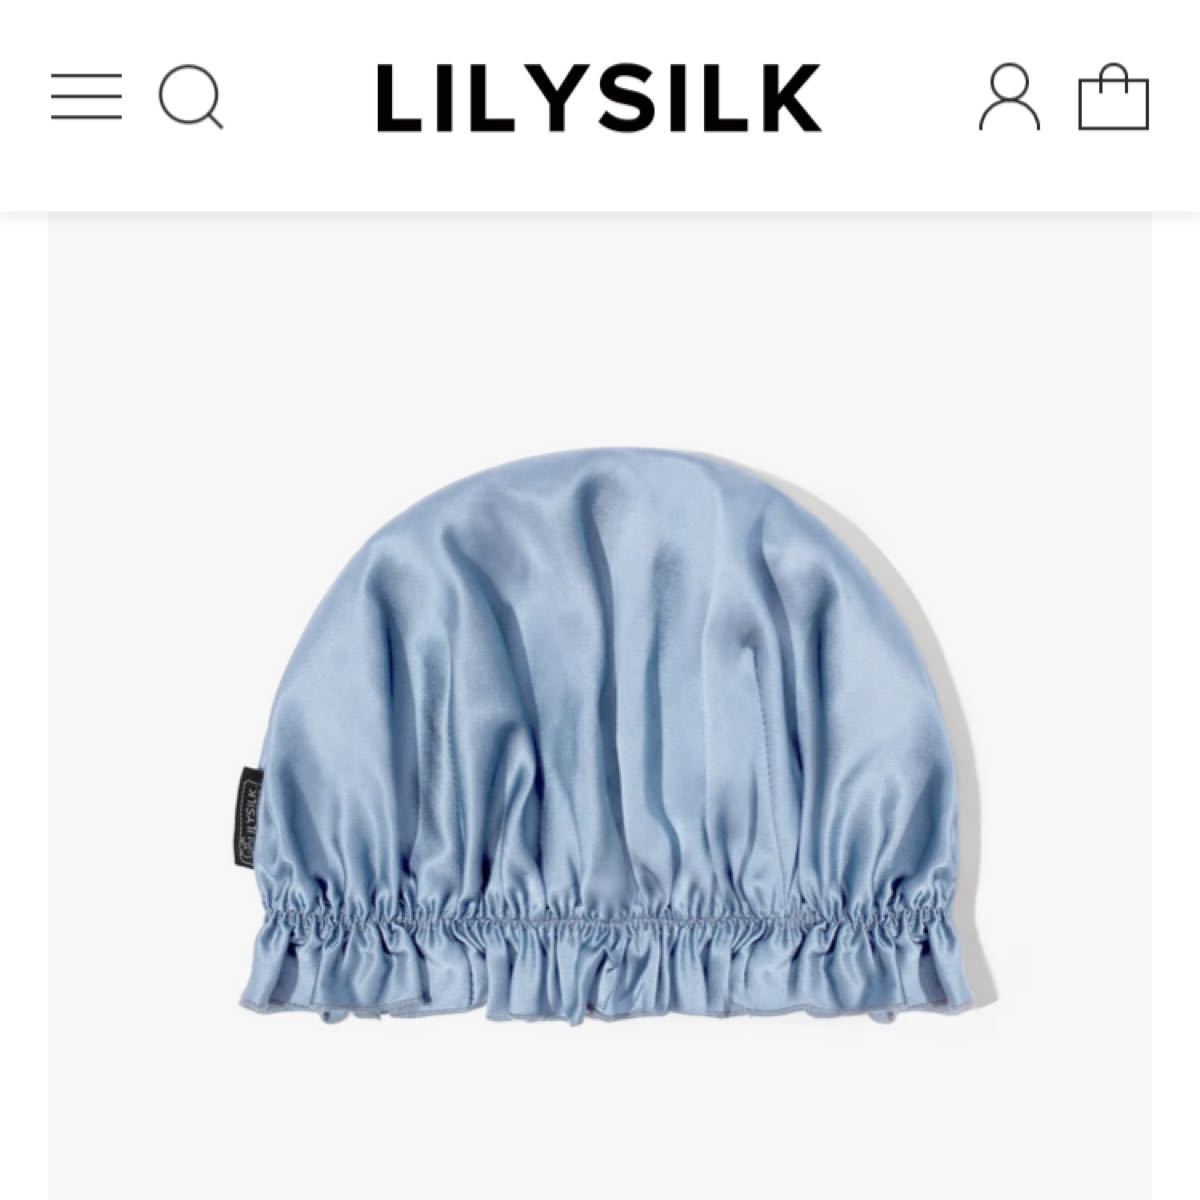 LILY SILK リリーシルク ナイトキャップ ライトブルー その他